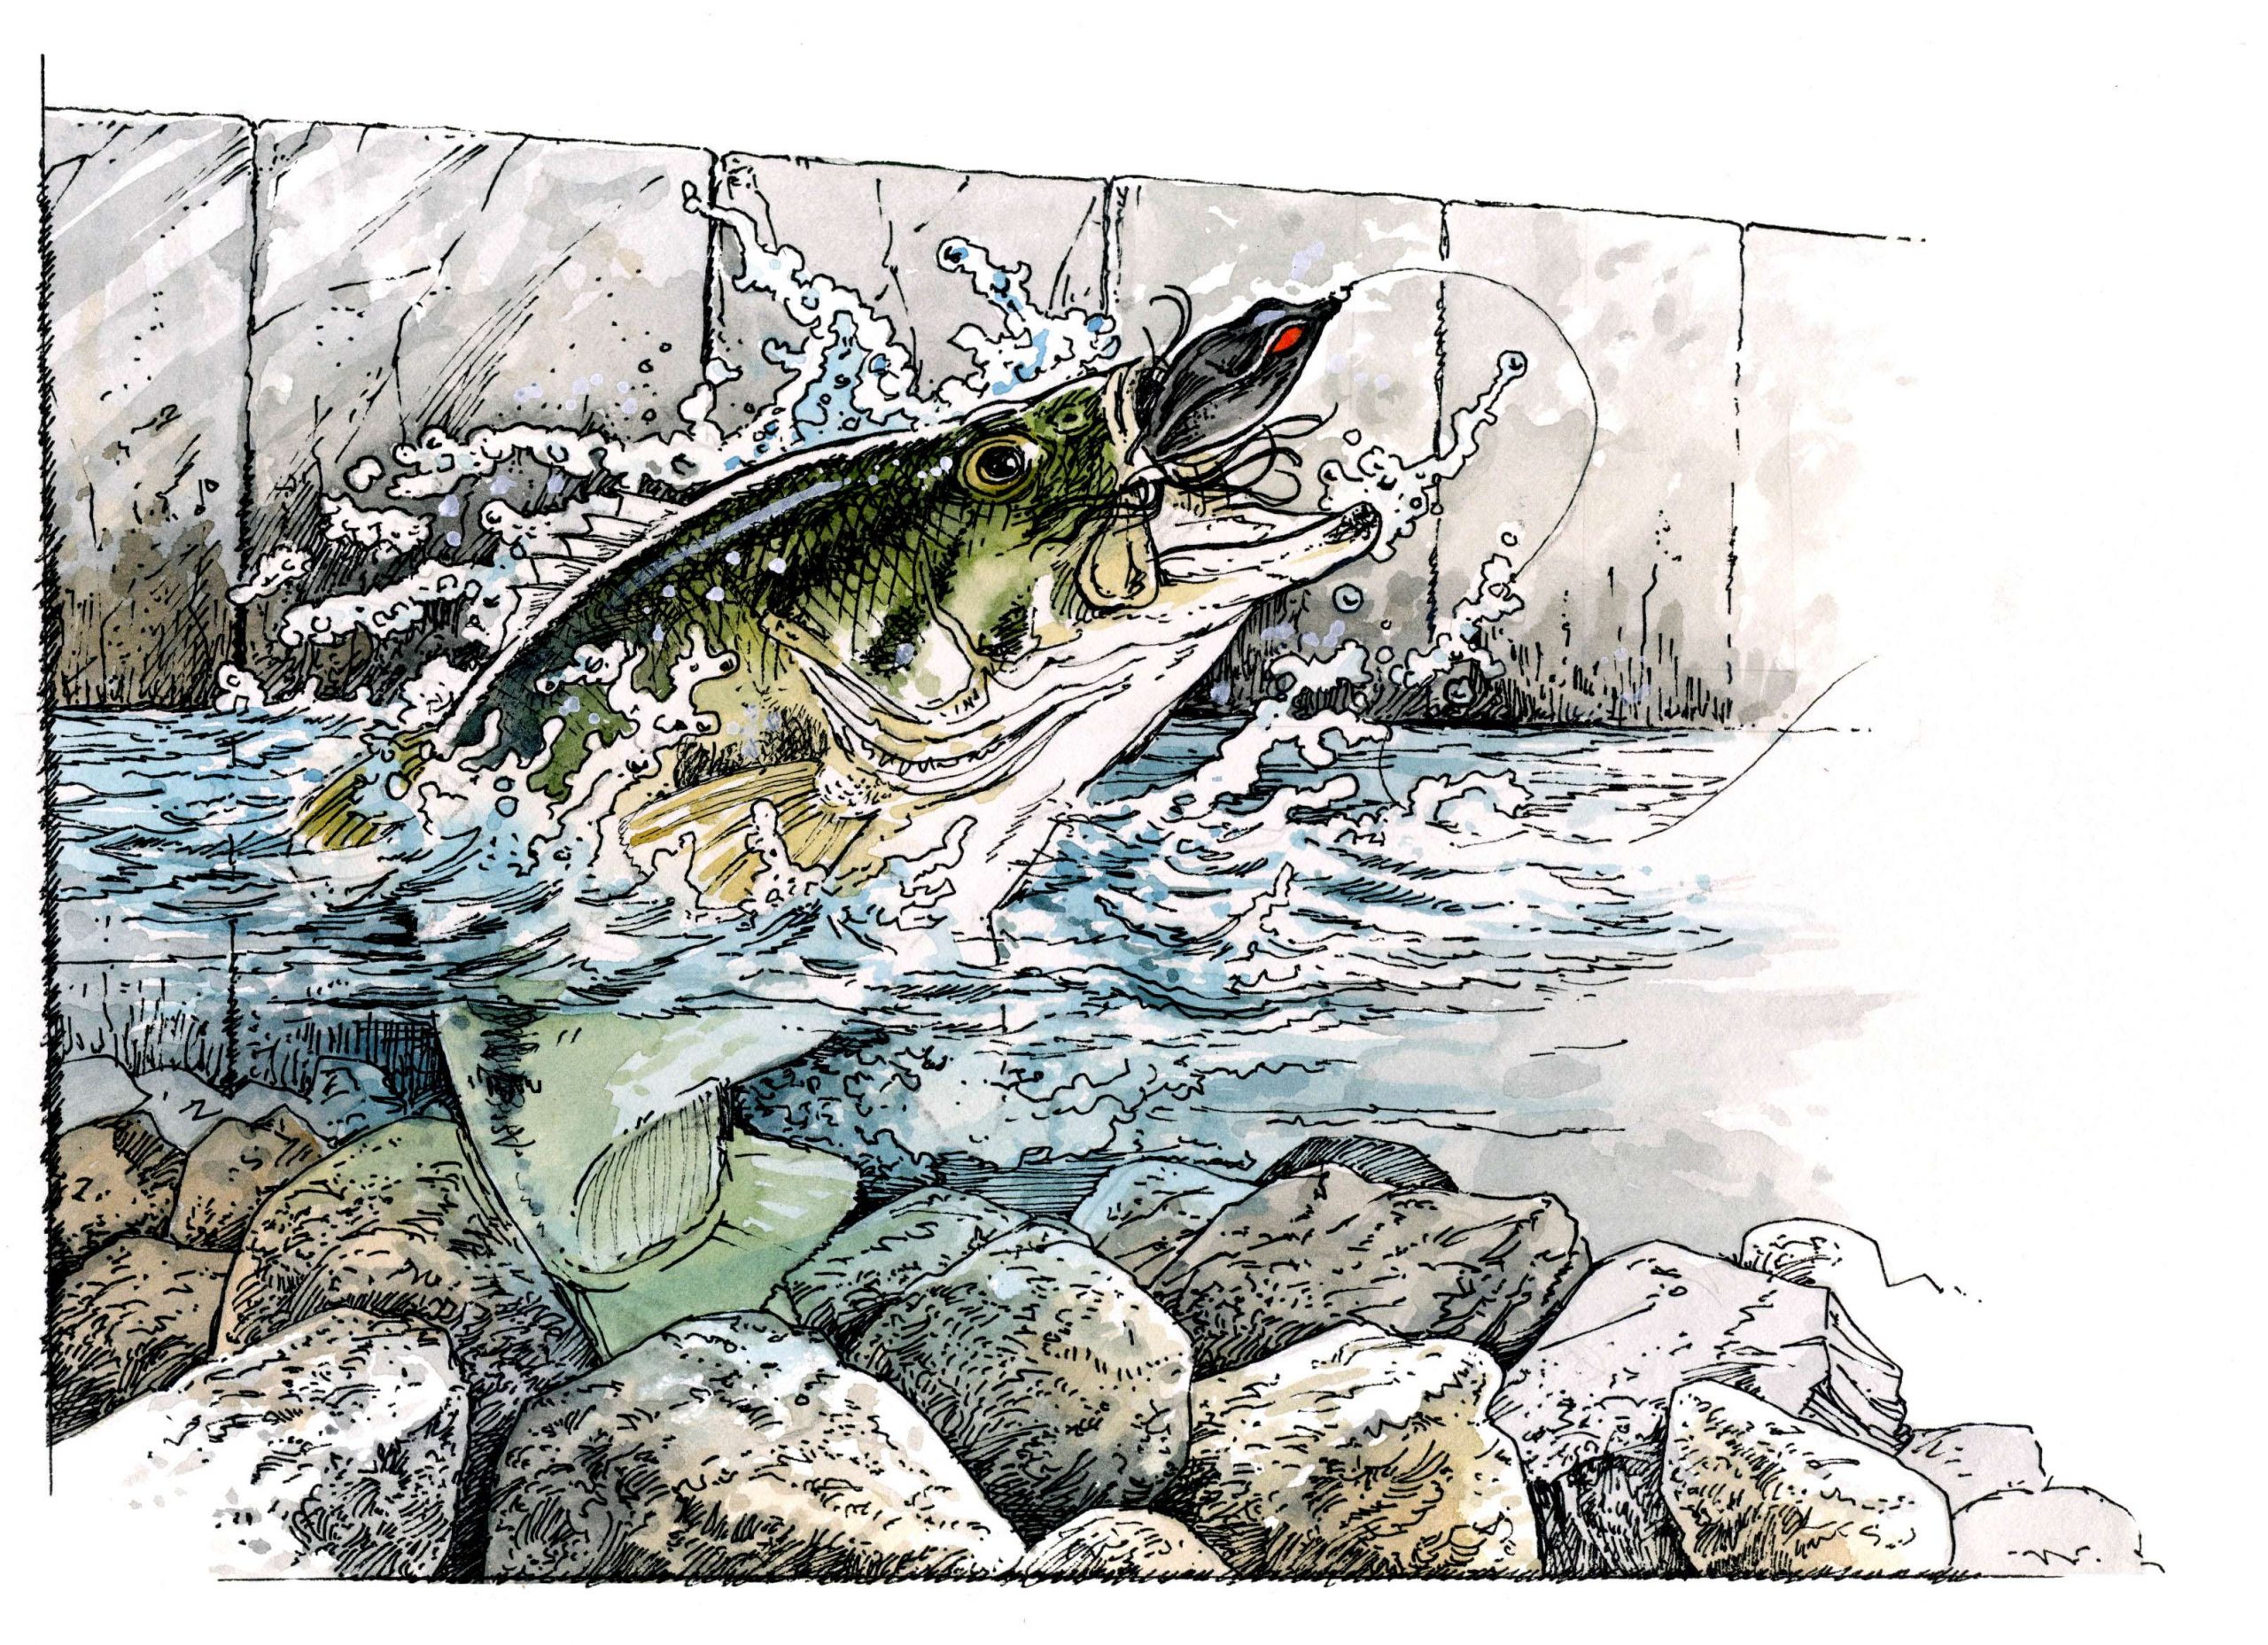 Armstrong specialized in capturing the movement of striking bass and rippling water.